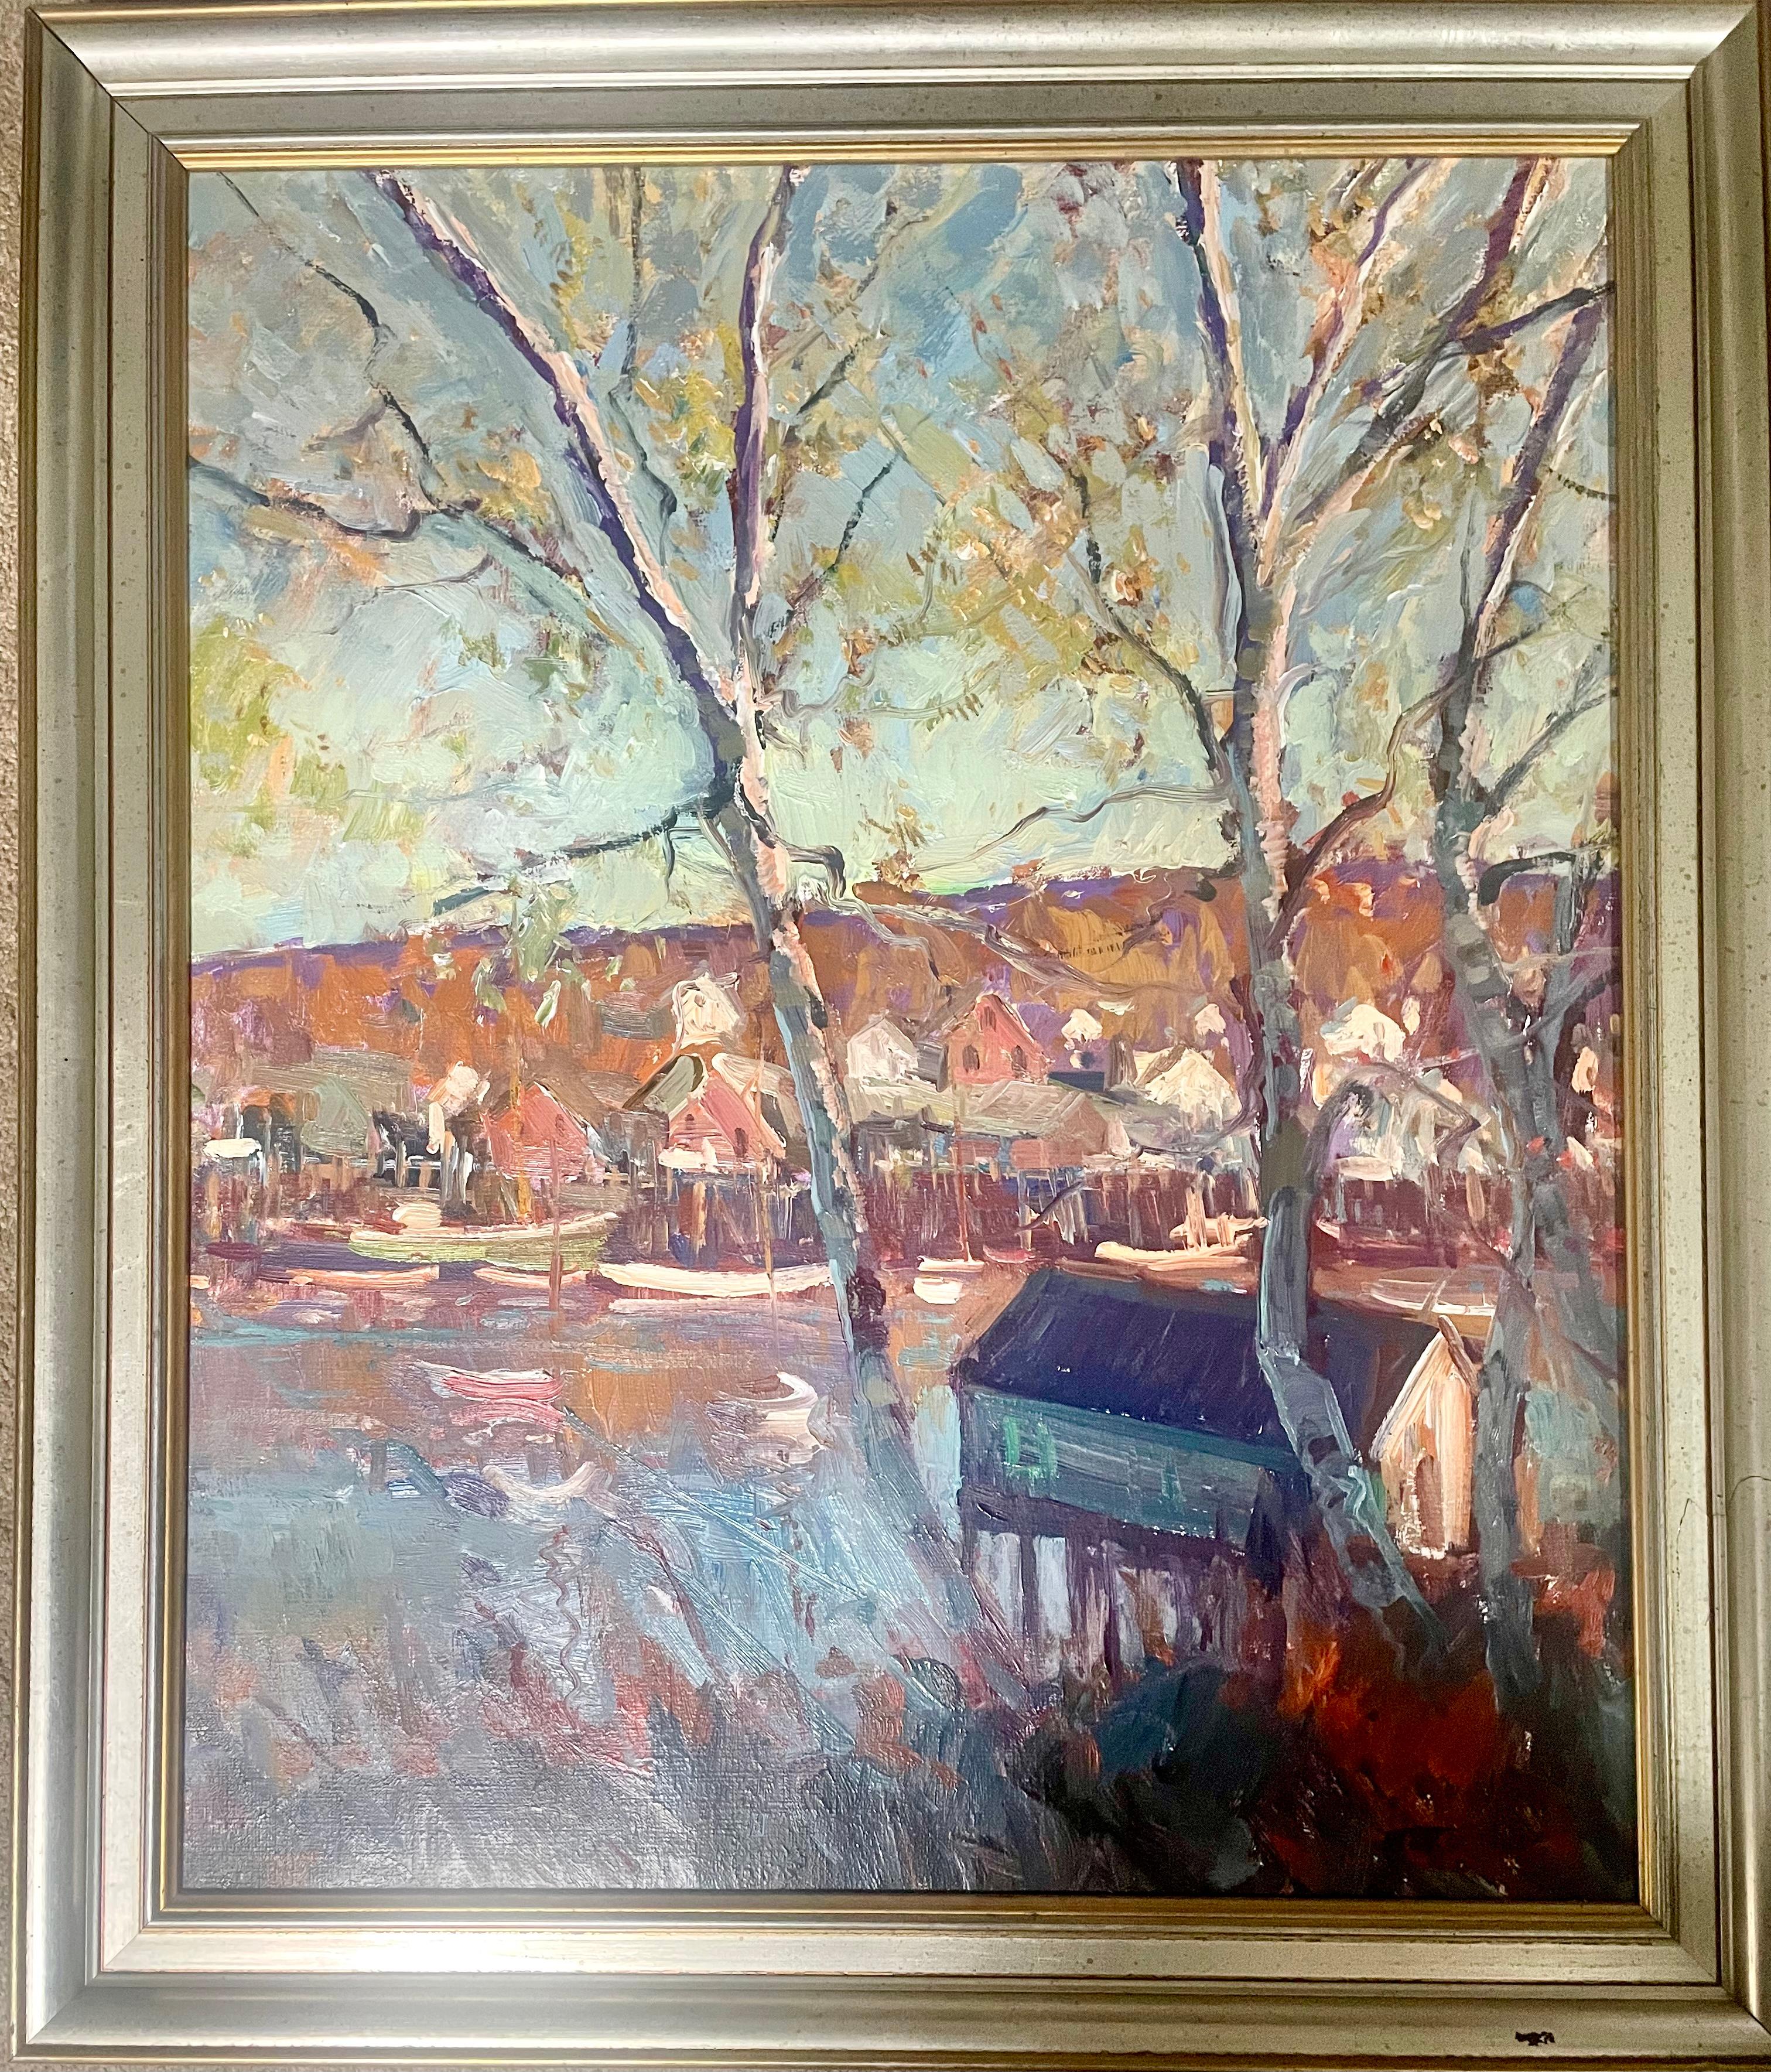 “Birches at New Harbor“ - Painting by Robert Charles Gruppe